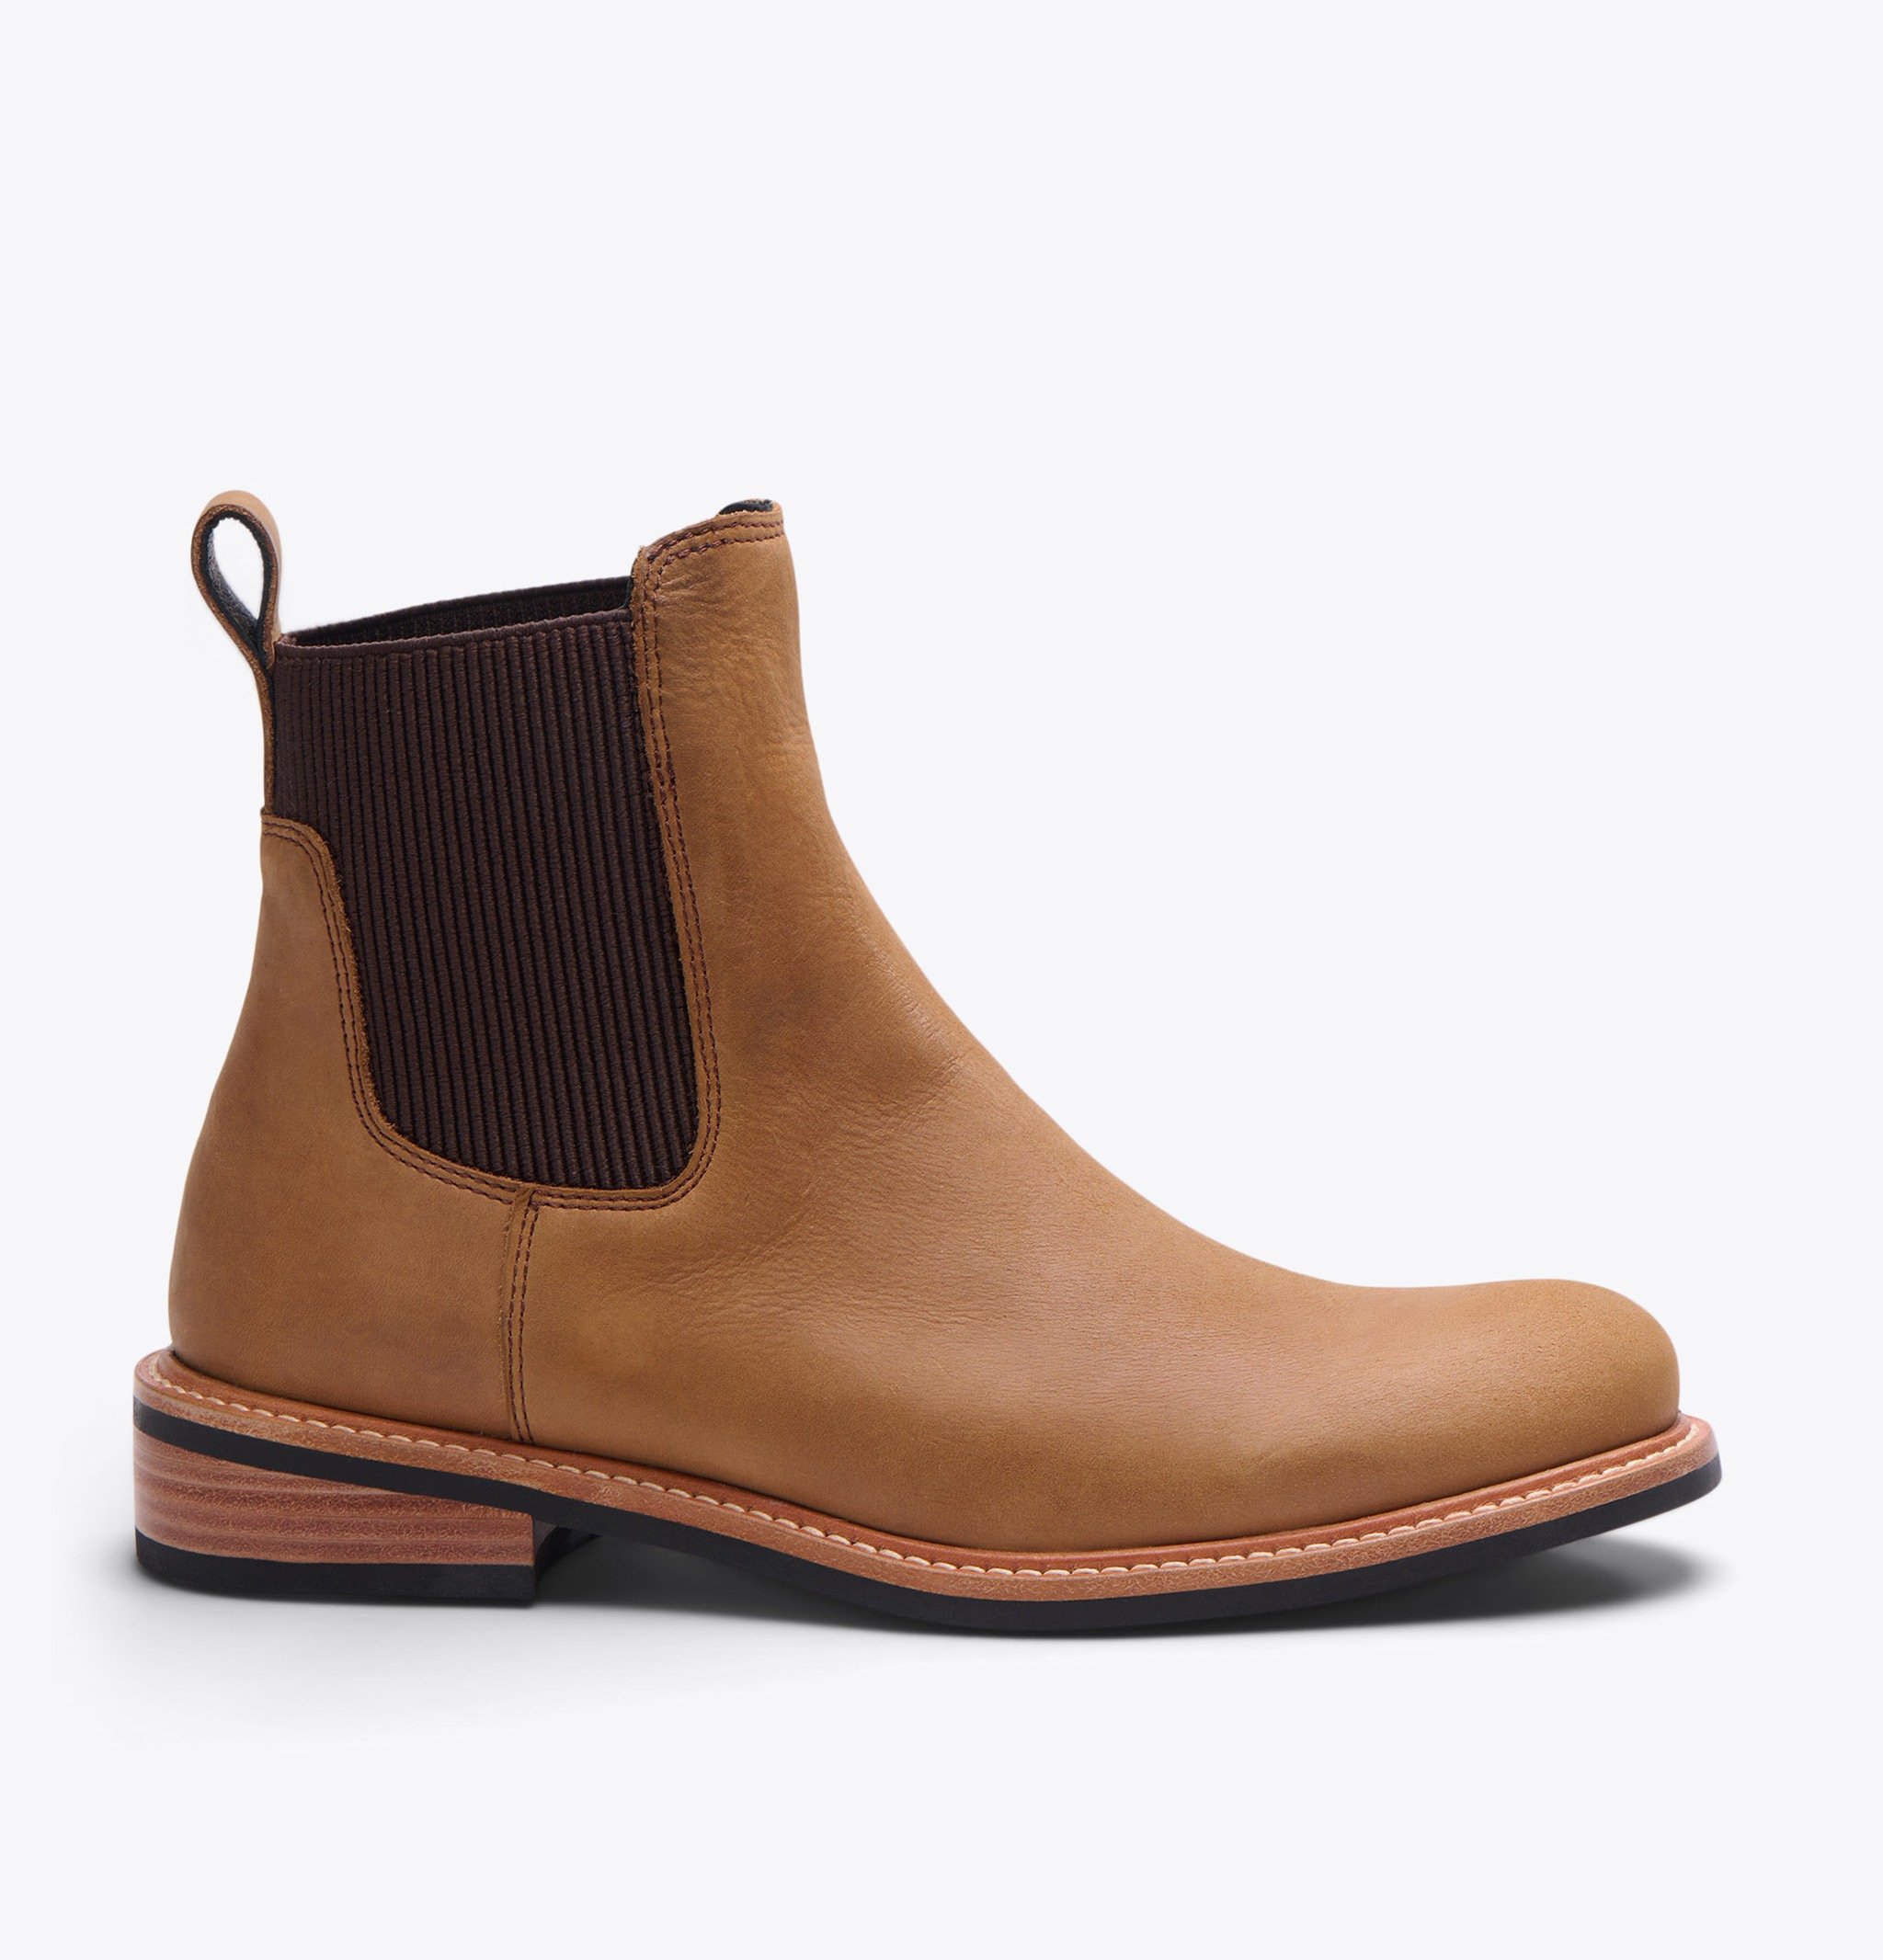 Nisolo Carmen Chelsea Boot Almond - Every Nisolo product is built on the foundation of comfort, function, and design. 